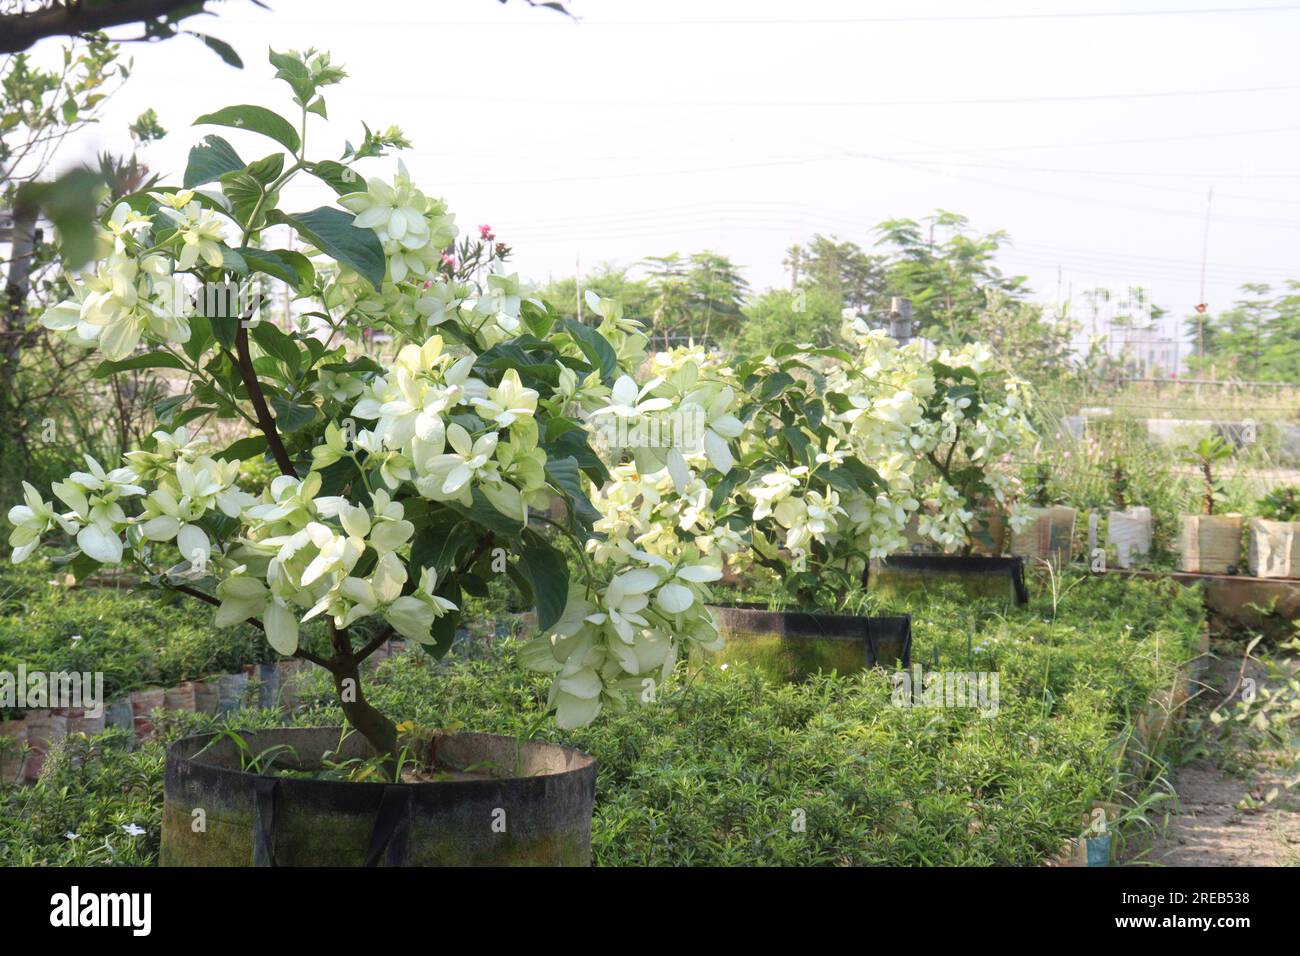 Malabar nut flower plant on farm for harvest are cash crops Stock Photo